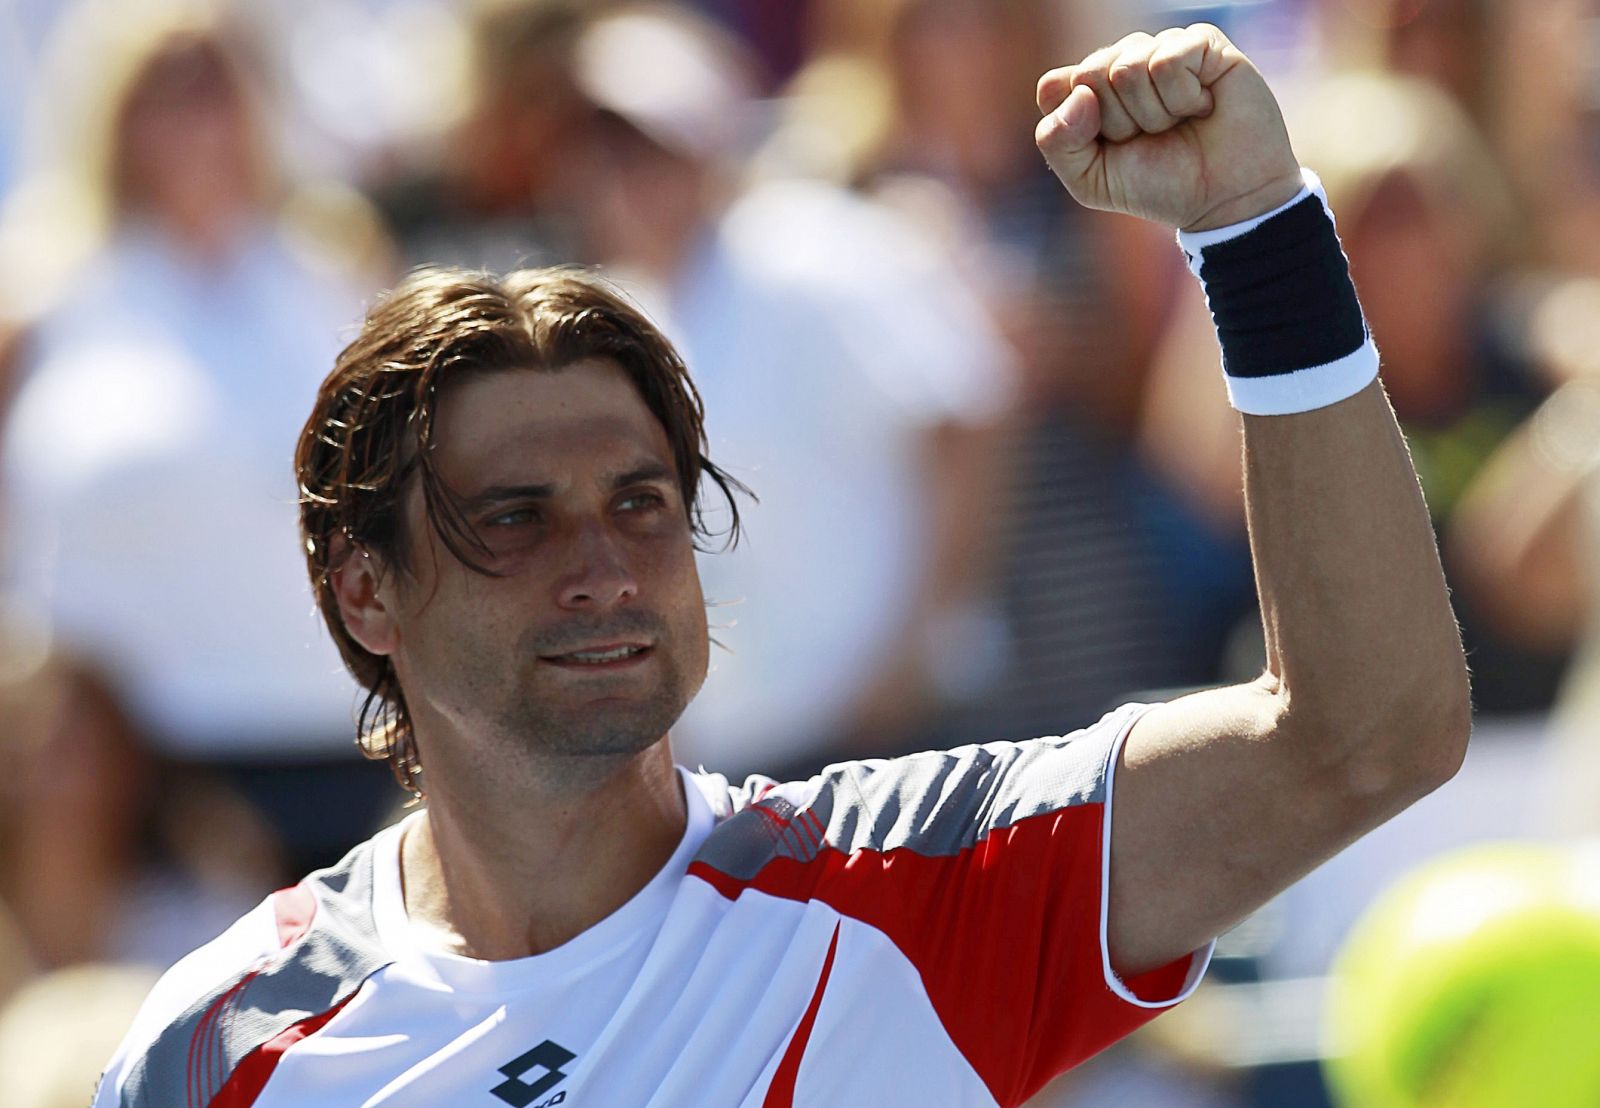 Ferrer of Spain celebrates after defeating Anderson of South Africa in their men's singles match at the U.S. Open tennis tournament in New York